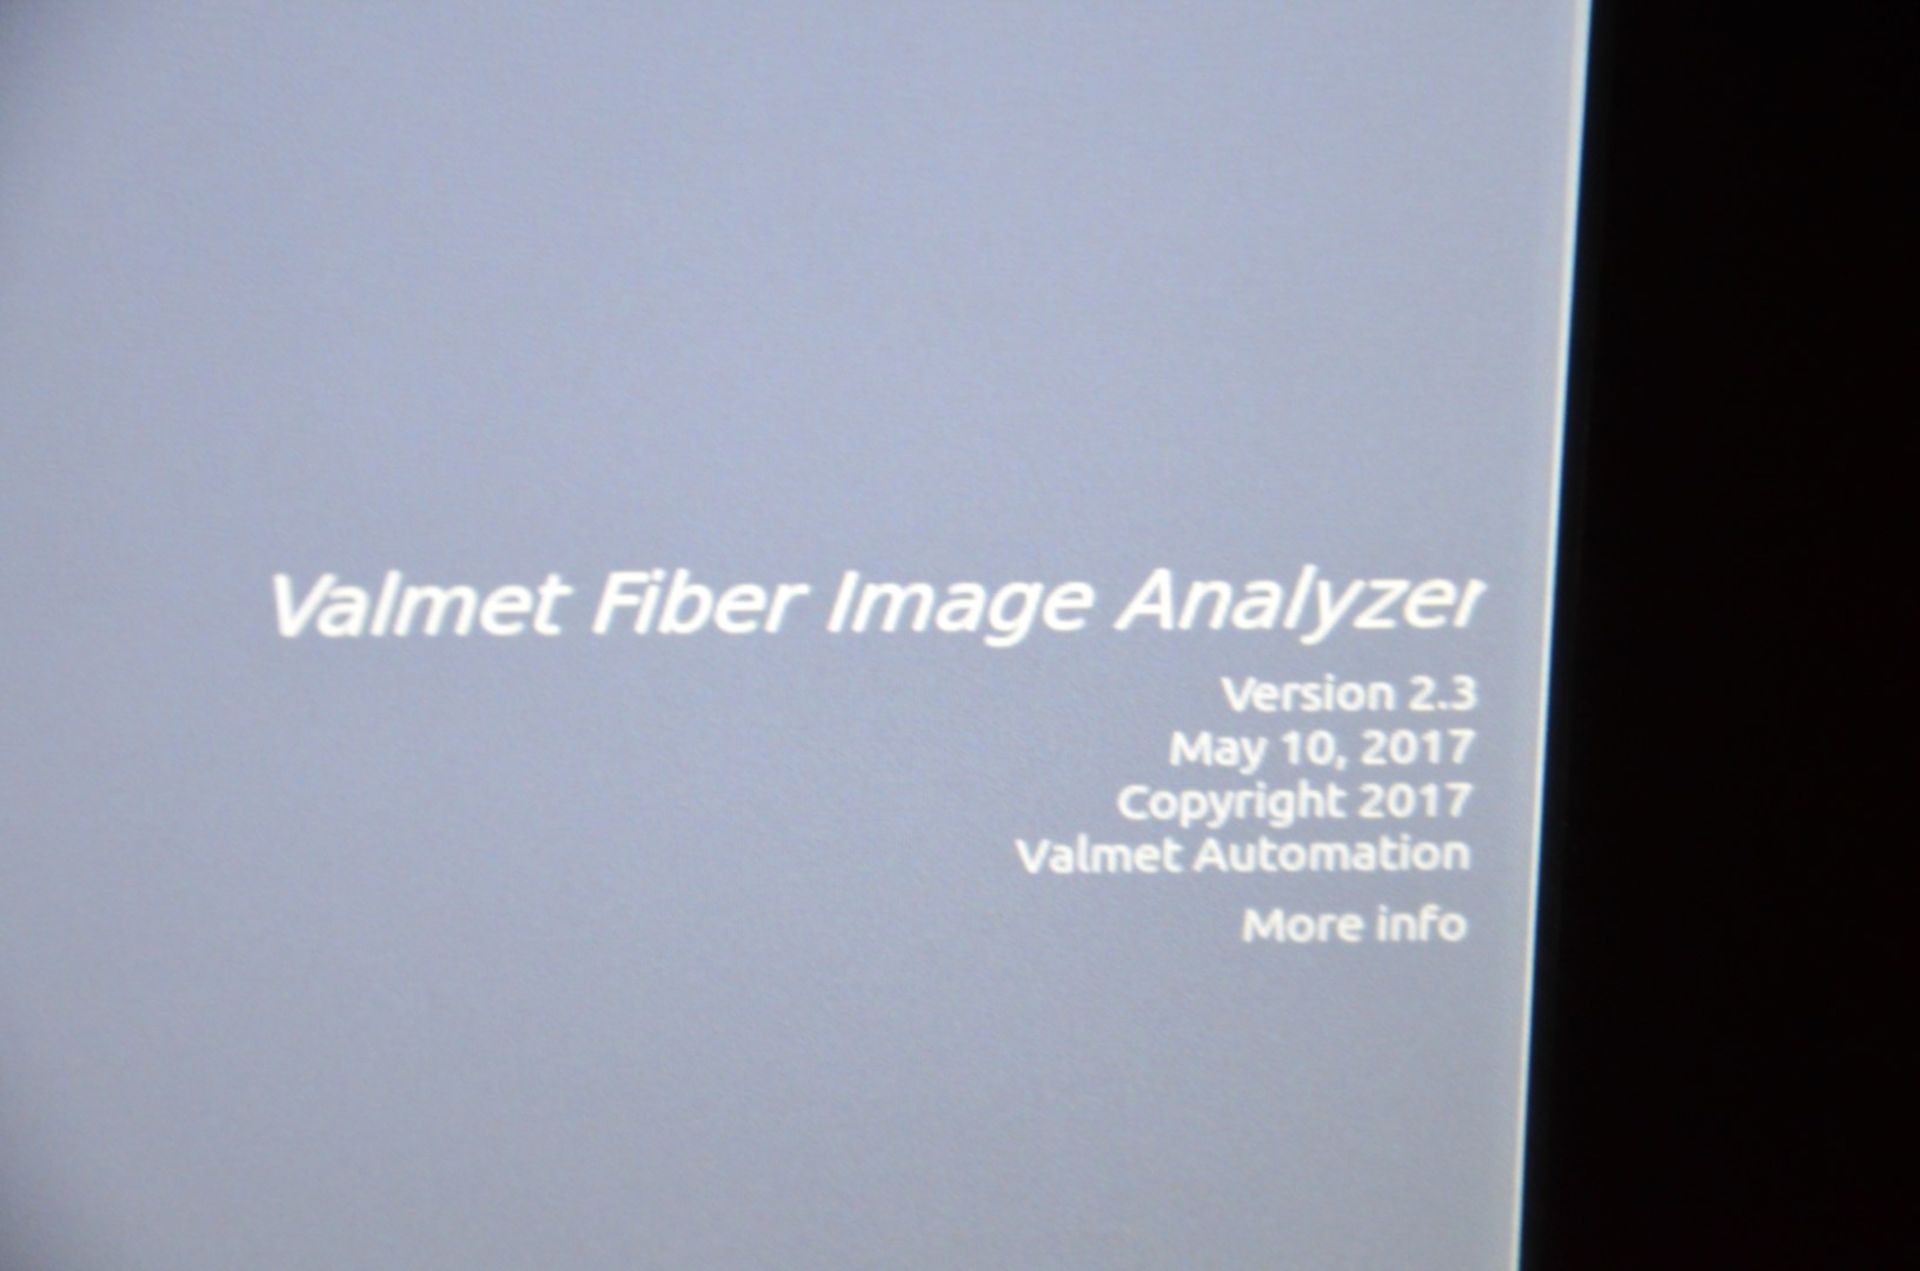 VALMET (2017) FS5 OPTICAL FIBER IMAGE ANALYZER WITH VALMET AUTOMATION VER 2.3 DIGITAL TOUCH SCREEN - Image 5 of 10